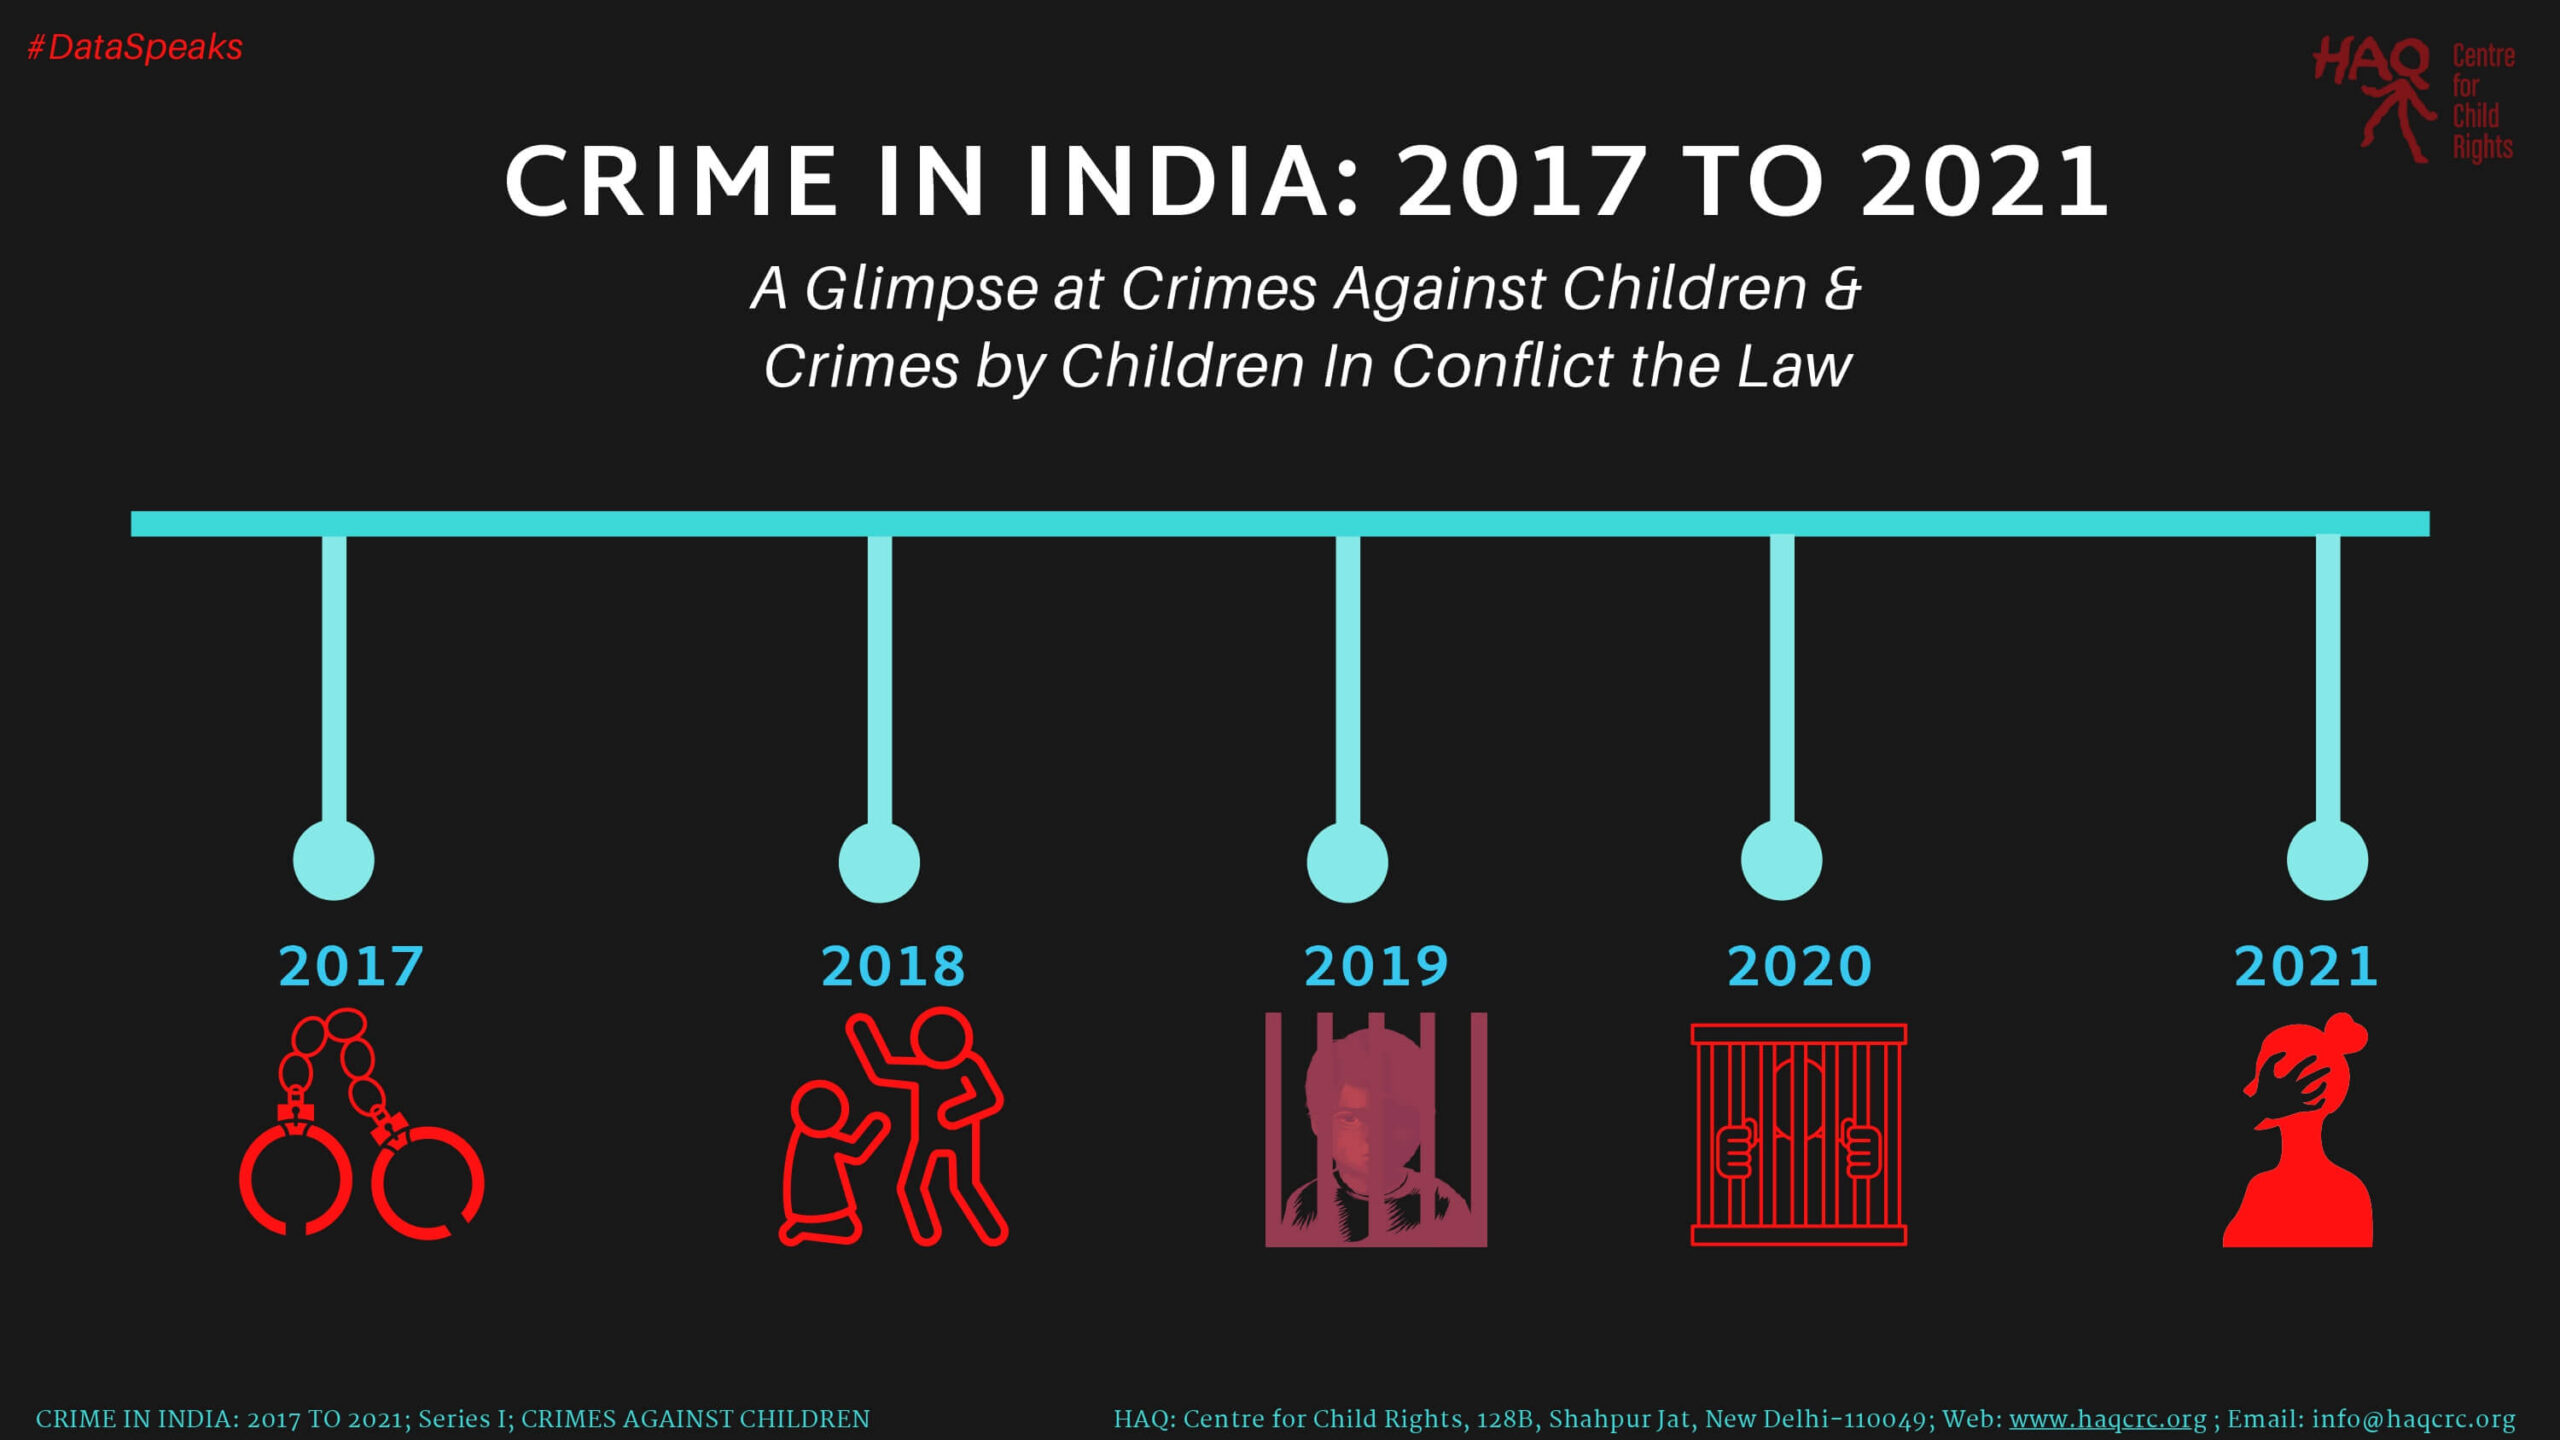 CRIME IN INDIA: 2017 TO 2021, A Glimpse at Crimes Against Children & Crimes by Children In Conflict the Law